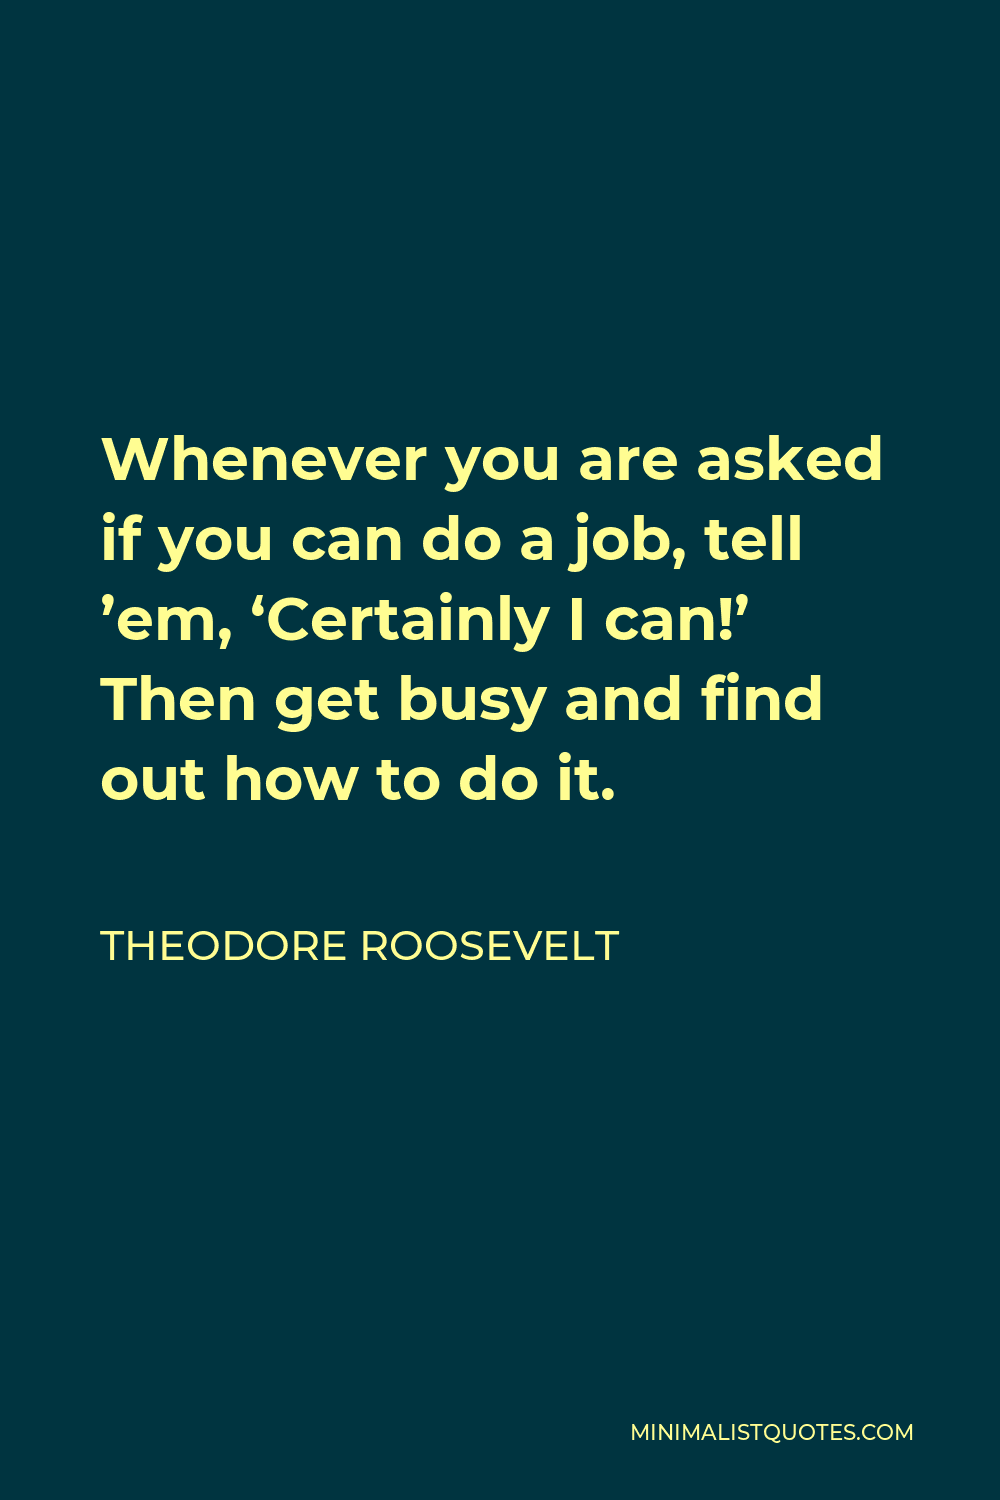 Theodore Roosevelt Quote - Whenever you are asked if you can do a job, tell ’em, ‘Certainly I can!’ Then get busy and find out how to do it.